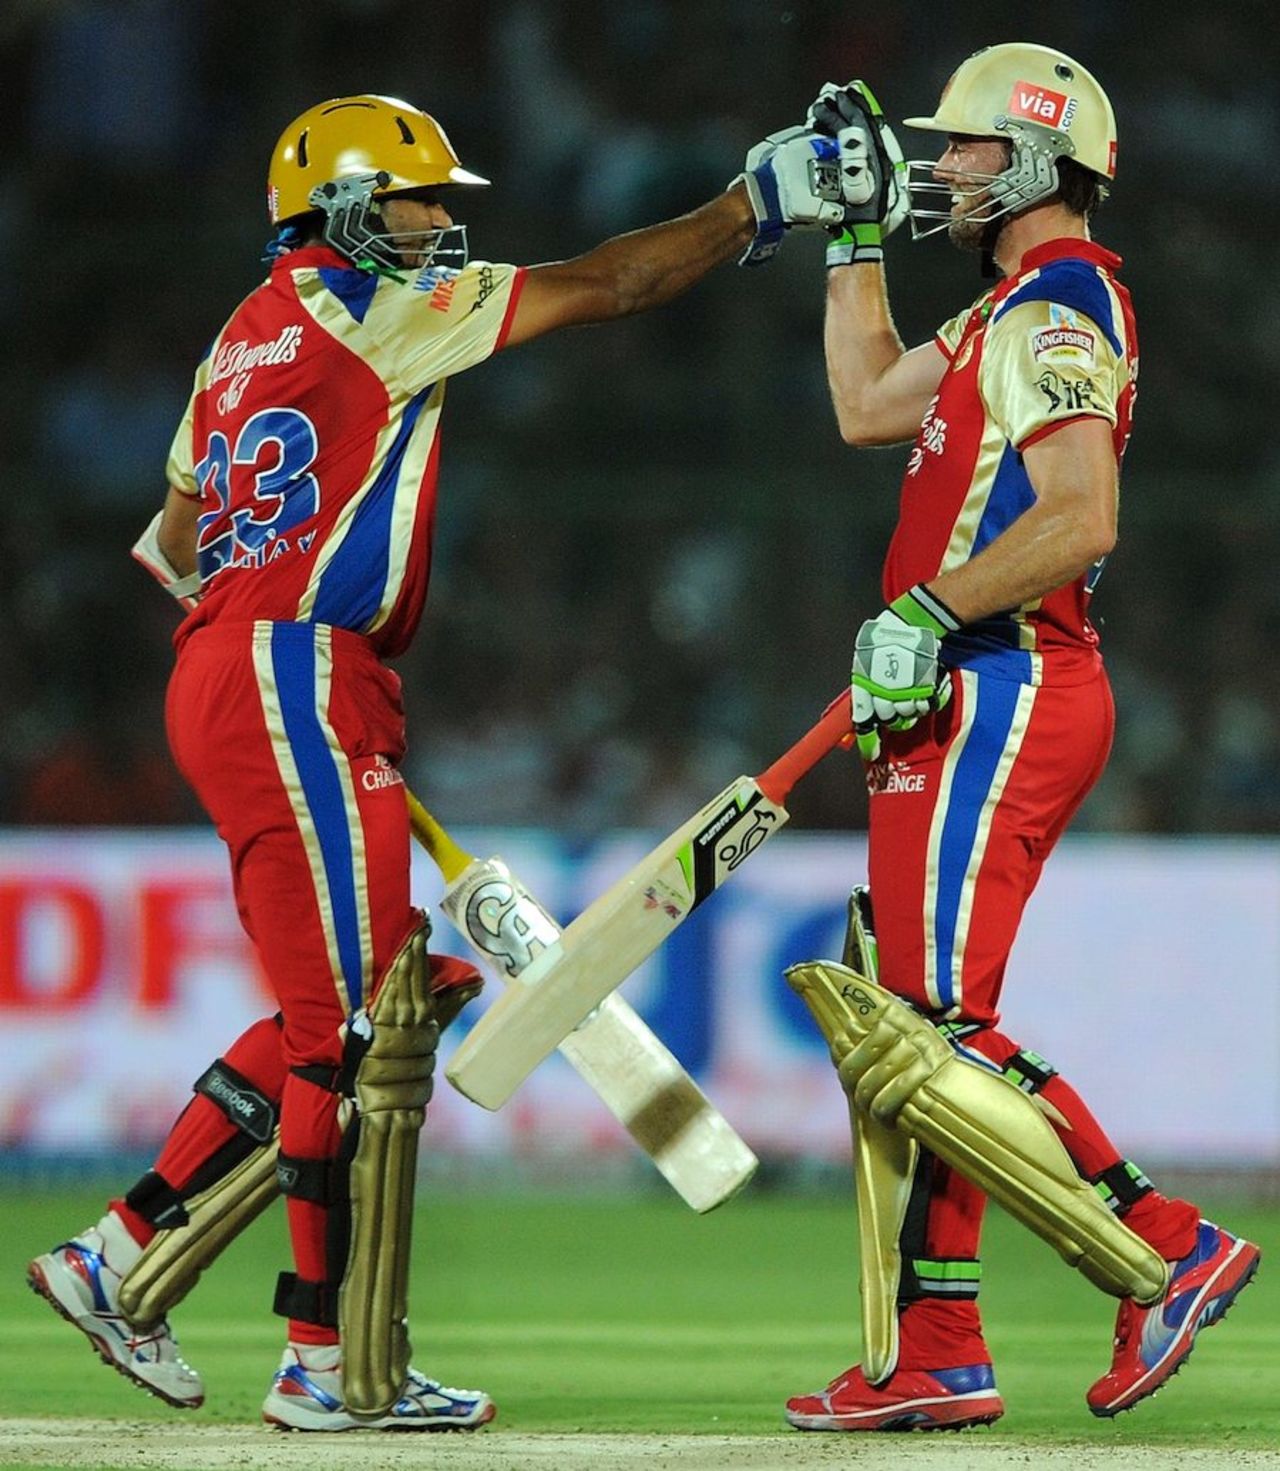 AB de Villiers and Tillakaratne Dilshan added 122 runs in 8.2 overs, Rajasthan Royals v Royal Challengers Bangalore, IPL, Jaipur, April 23, 2012